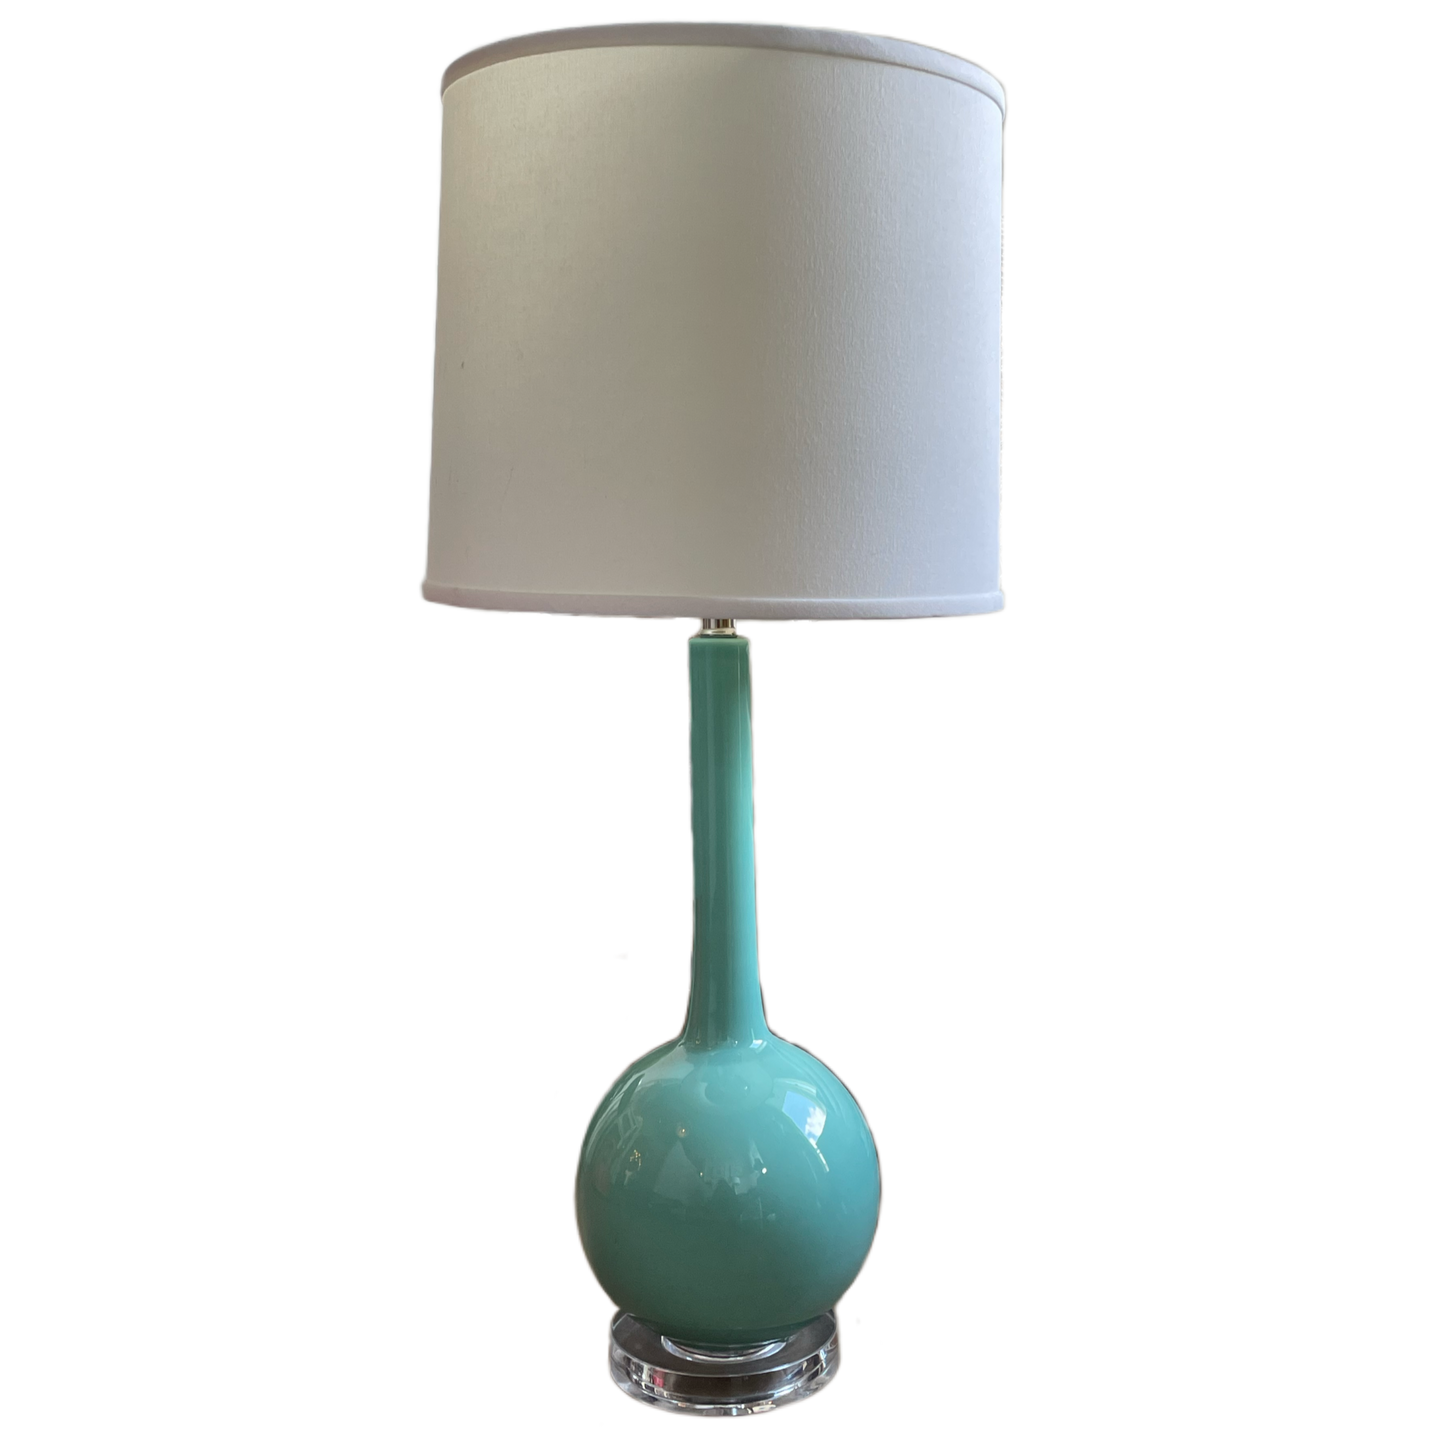 Lacquer Table Lamp